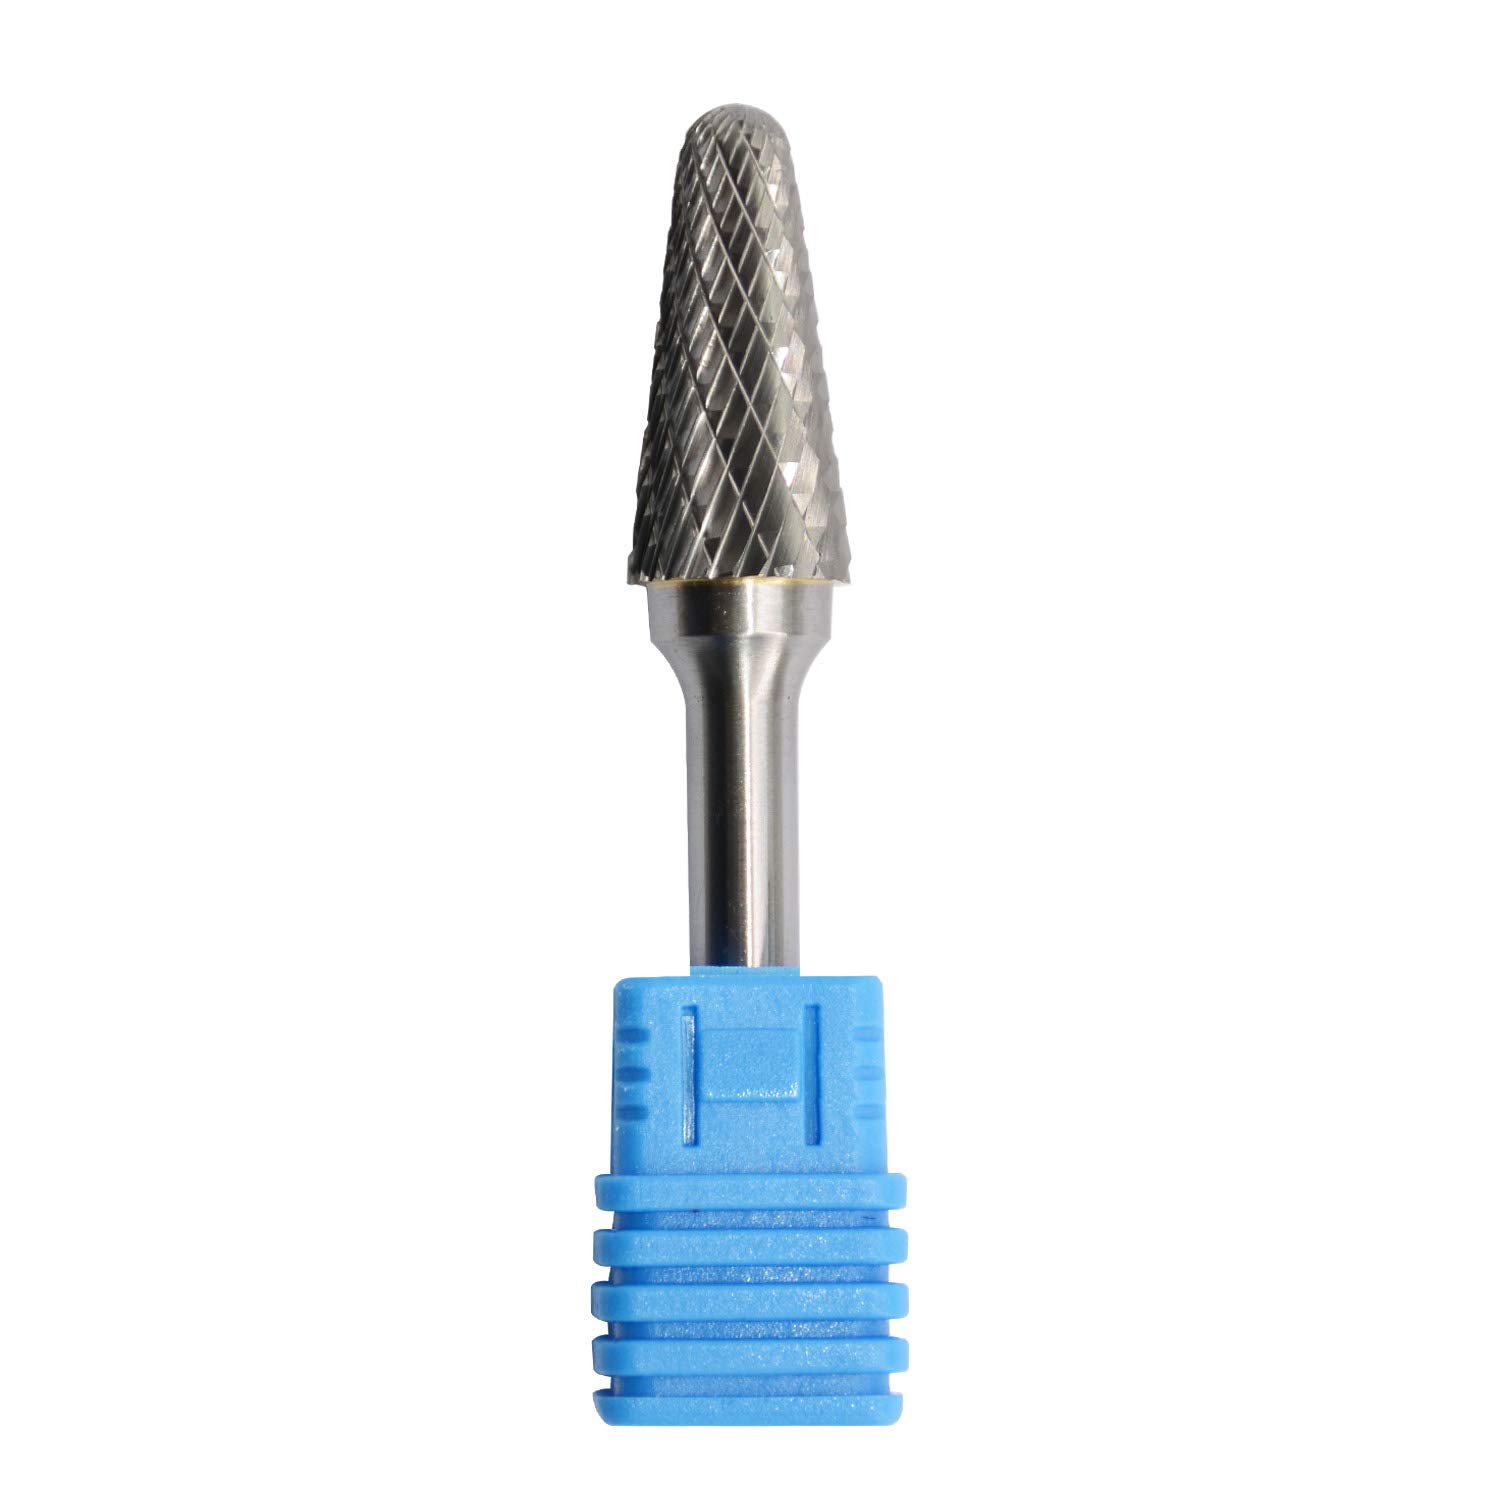 SL-4 Tungsten Carbide Burr Rotary File Taper Shape with Radius End Double Cut with 1/4"Shank for Die Grinder Drill Bit